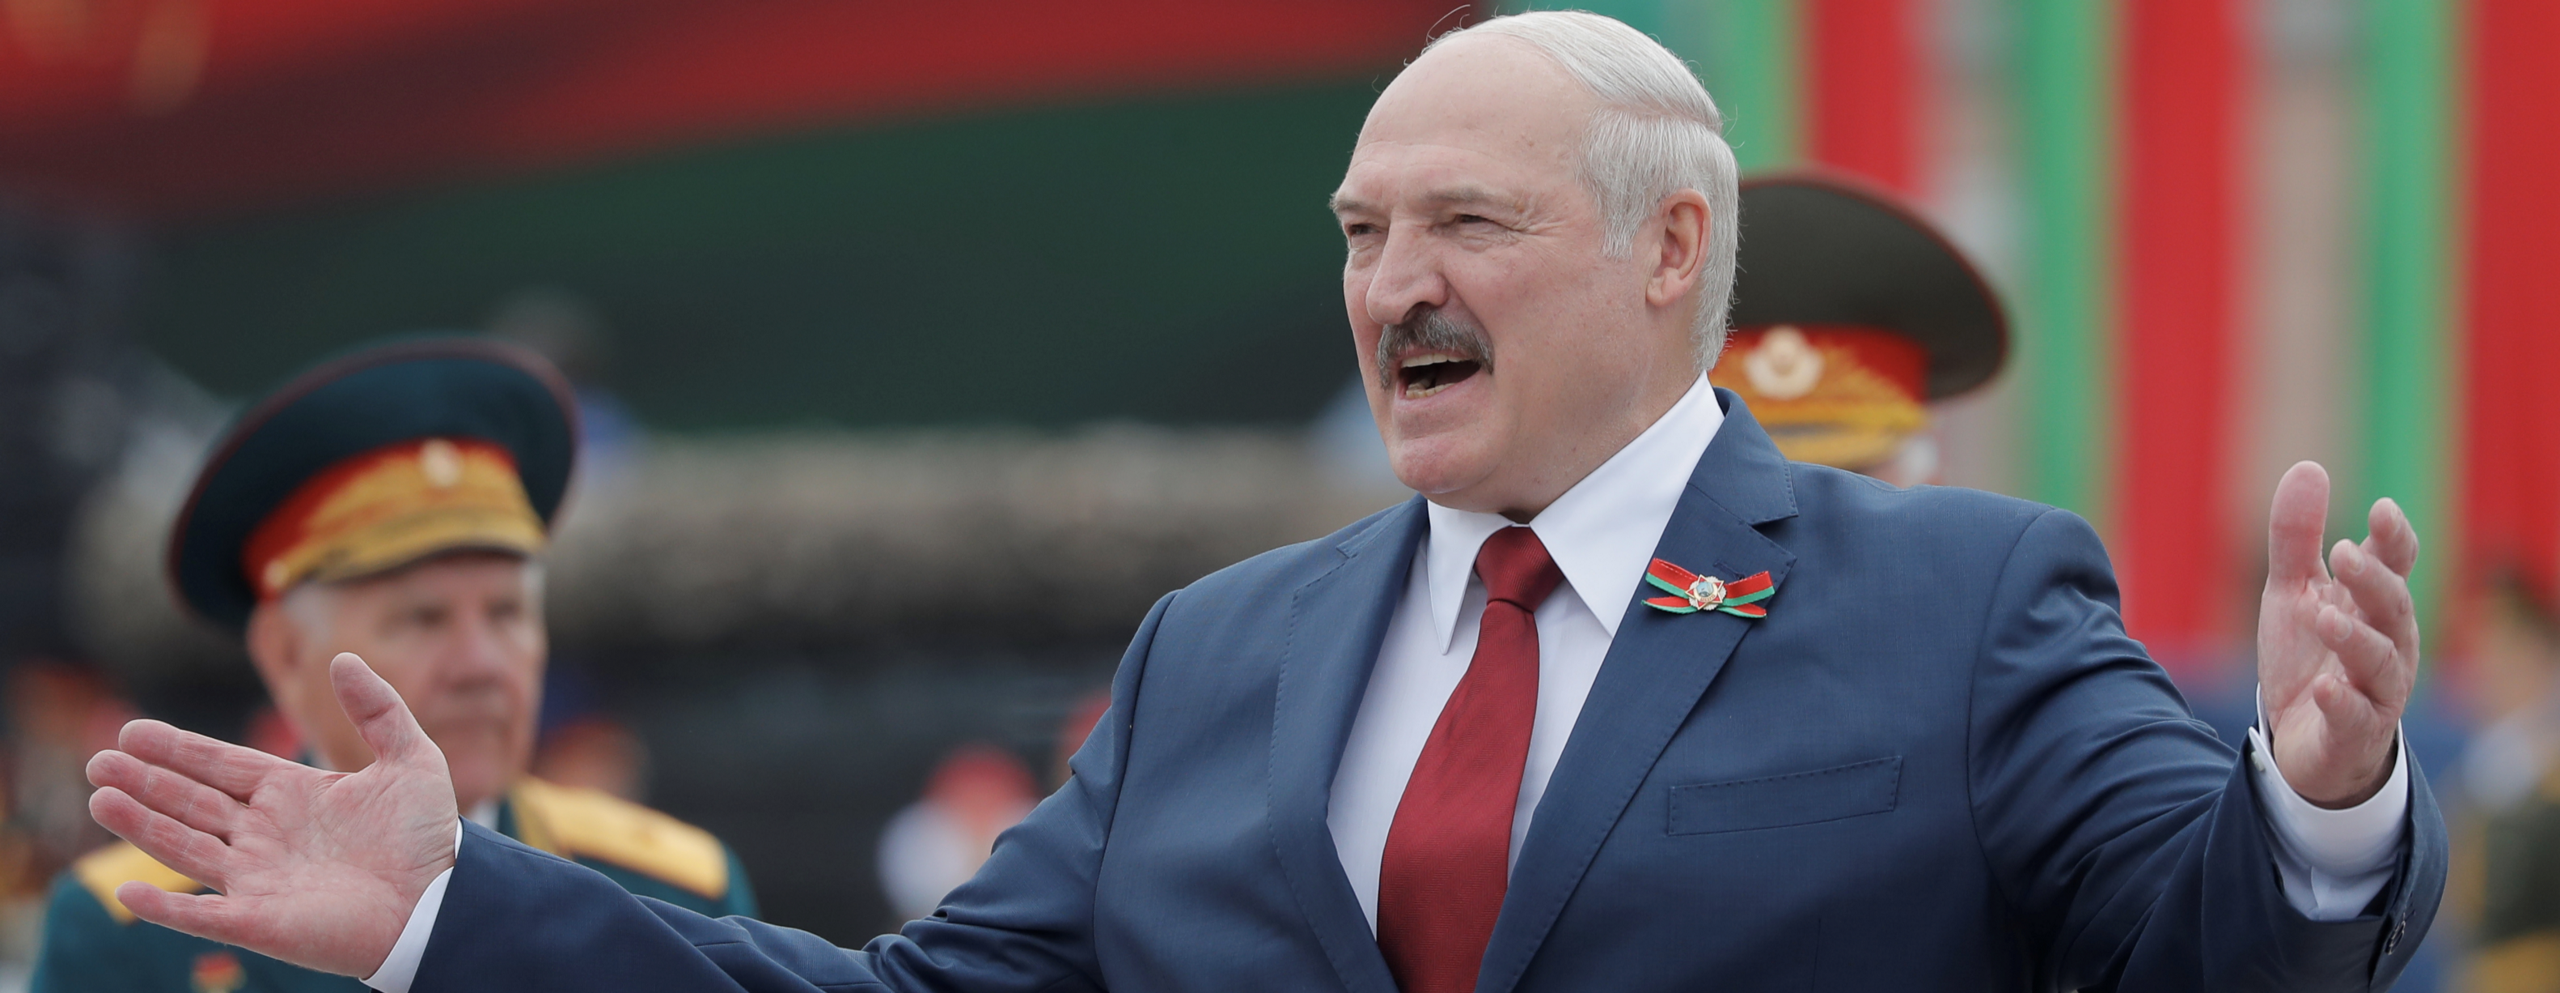 In Belarus, wave of grassroots activism knocked by unsupported claims of foreign interference